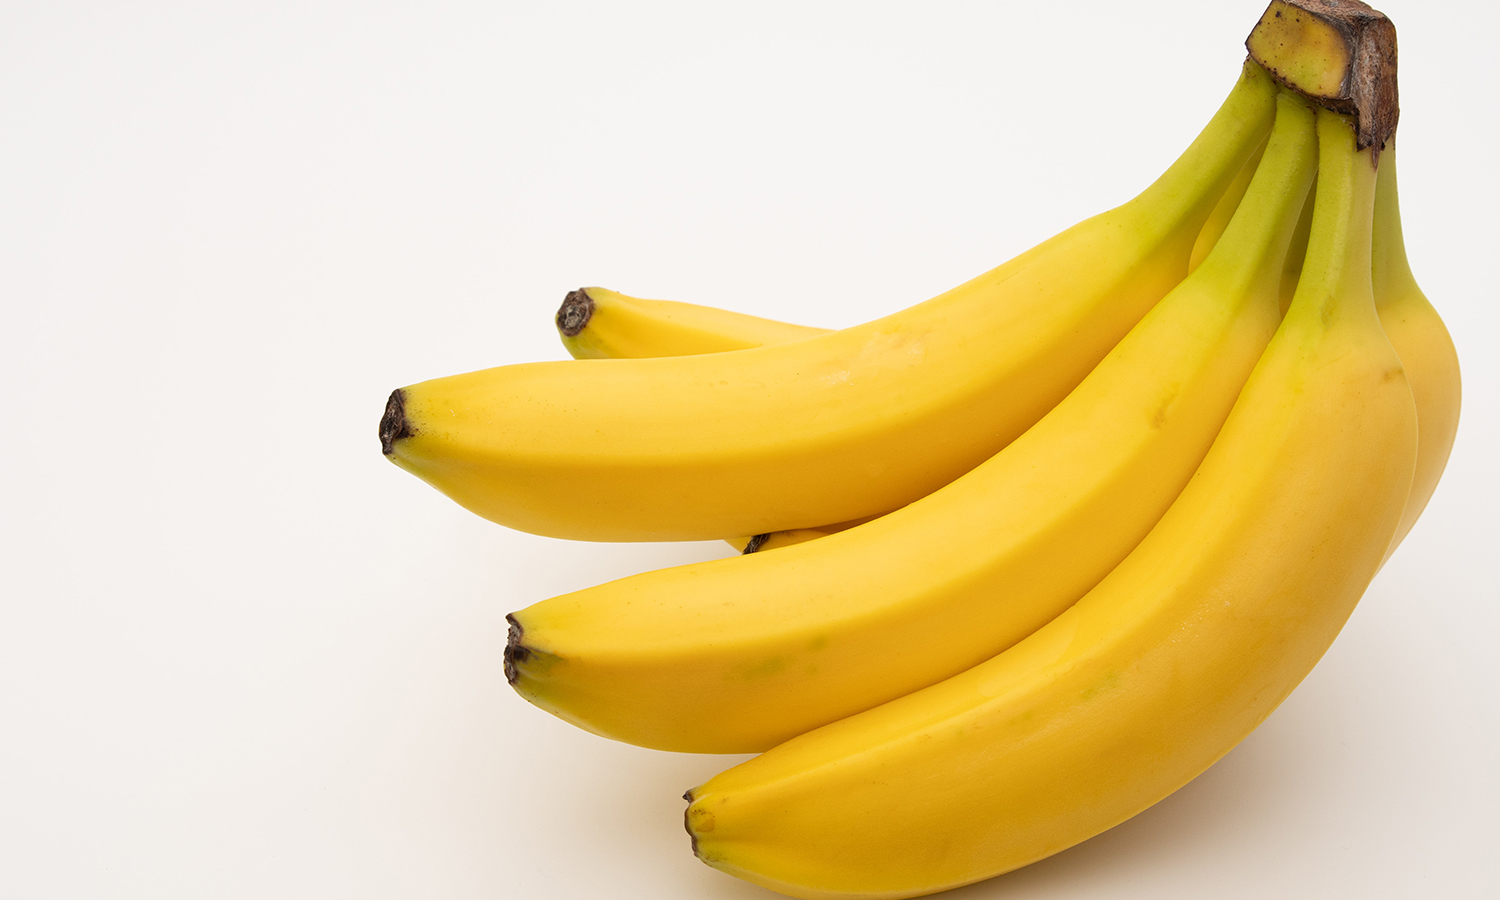 Can dogs eat bananas and what are the nutritional benefits for dogs